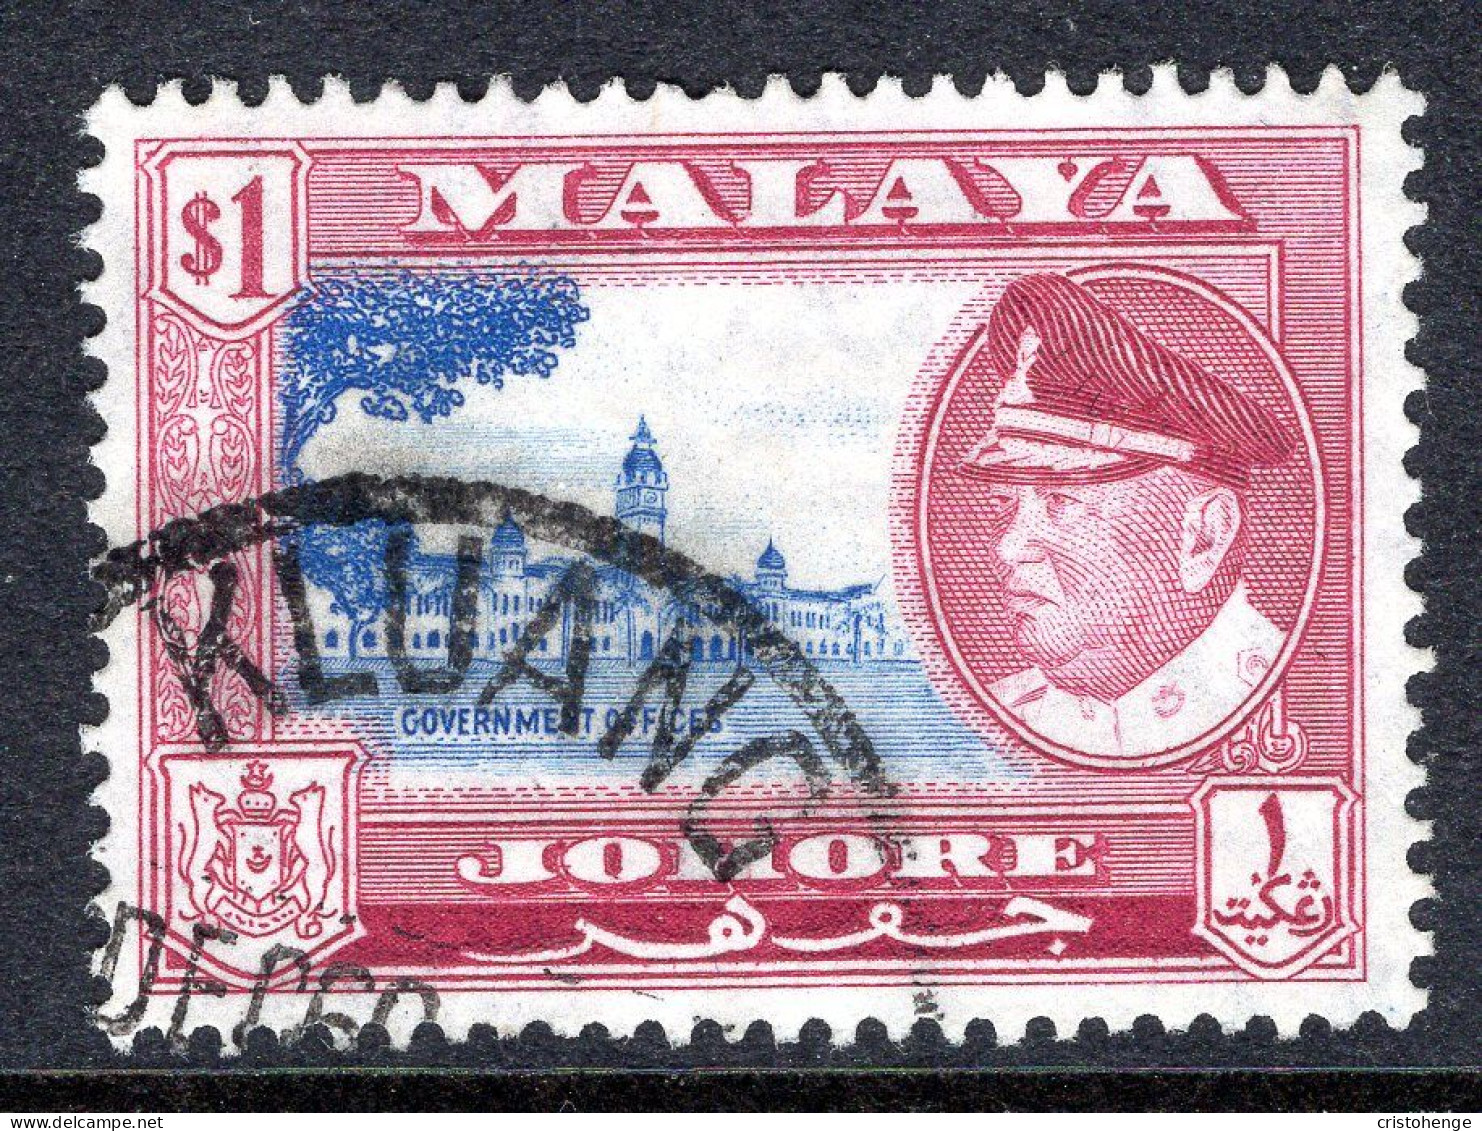 Malaysian States - Johore - 1960 Pictorials - $1 Government Offices Used (SG 163) - Johore